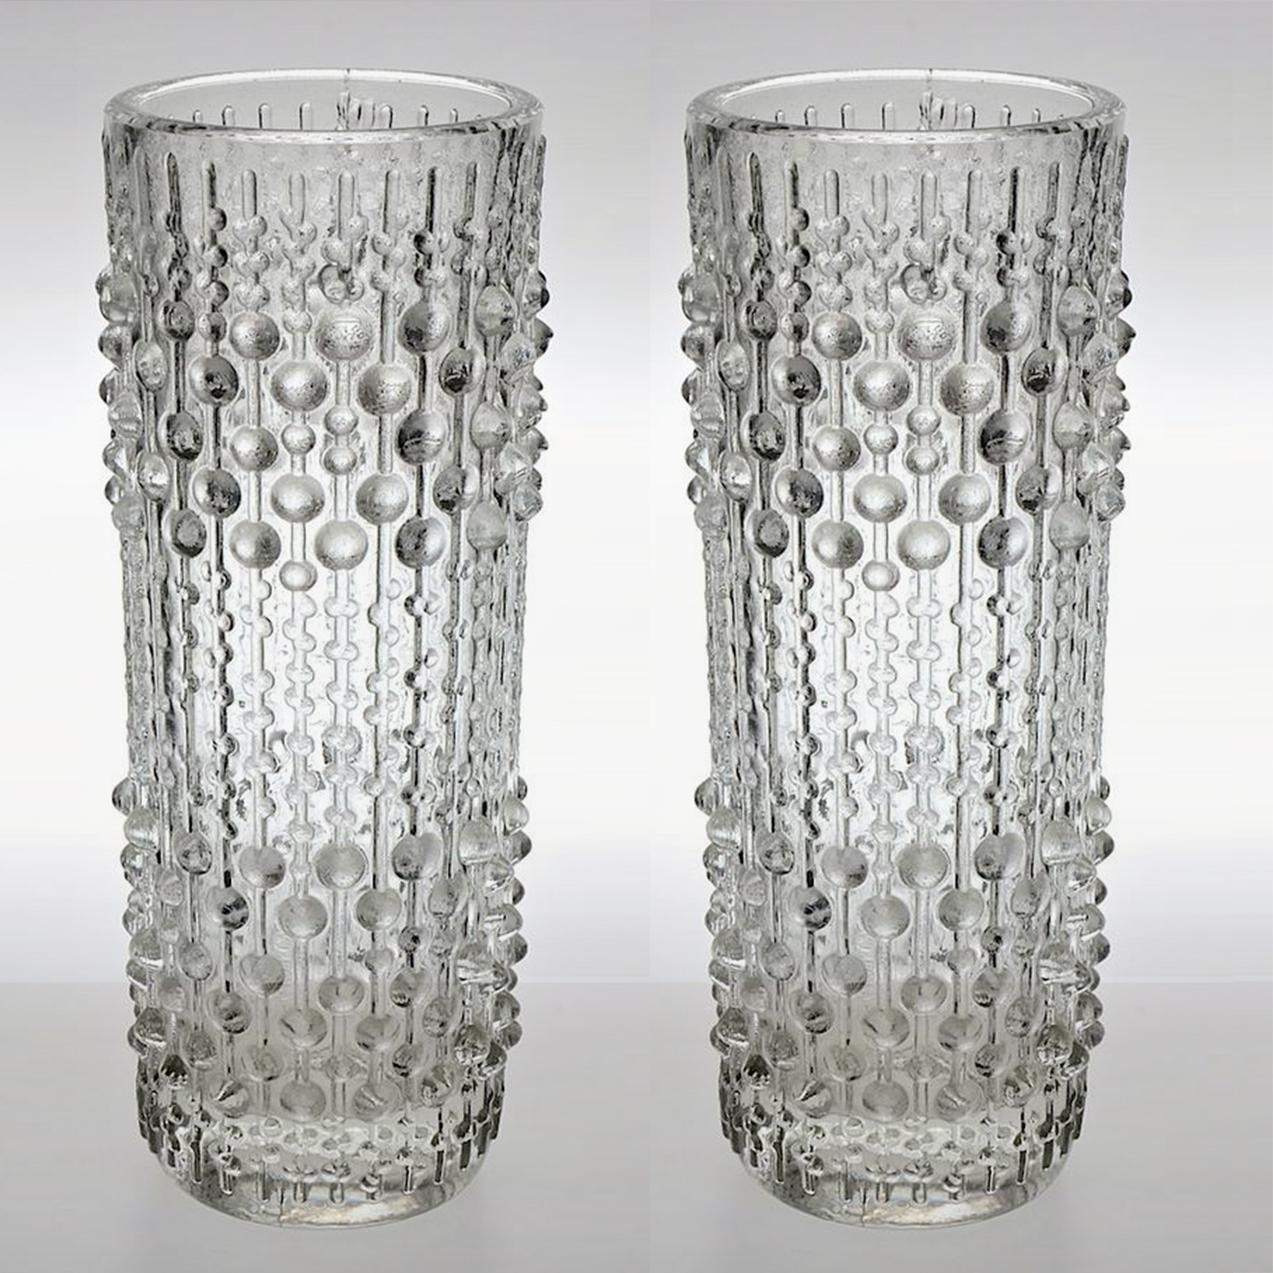 A pair of clear, pressed glass vases/ candleholders for Sklo Union glassworks. The Sklo Union formed in 1965, consisting of a group of Czech glass makers. Illuminates beautifully.

Interesting shape and texture. Called the ‘Candlewax’ design with